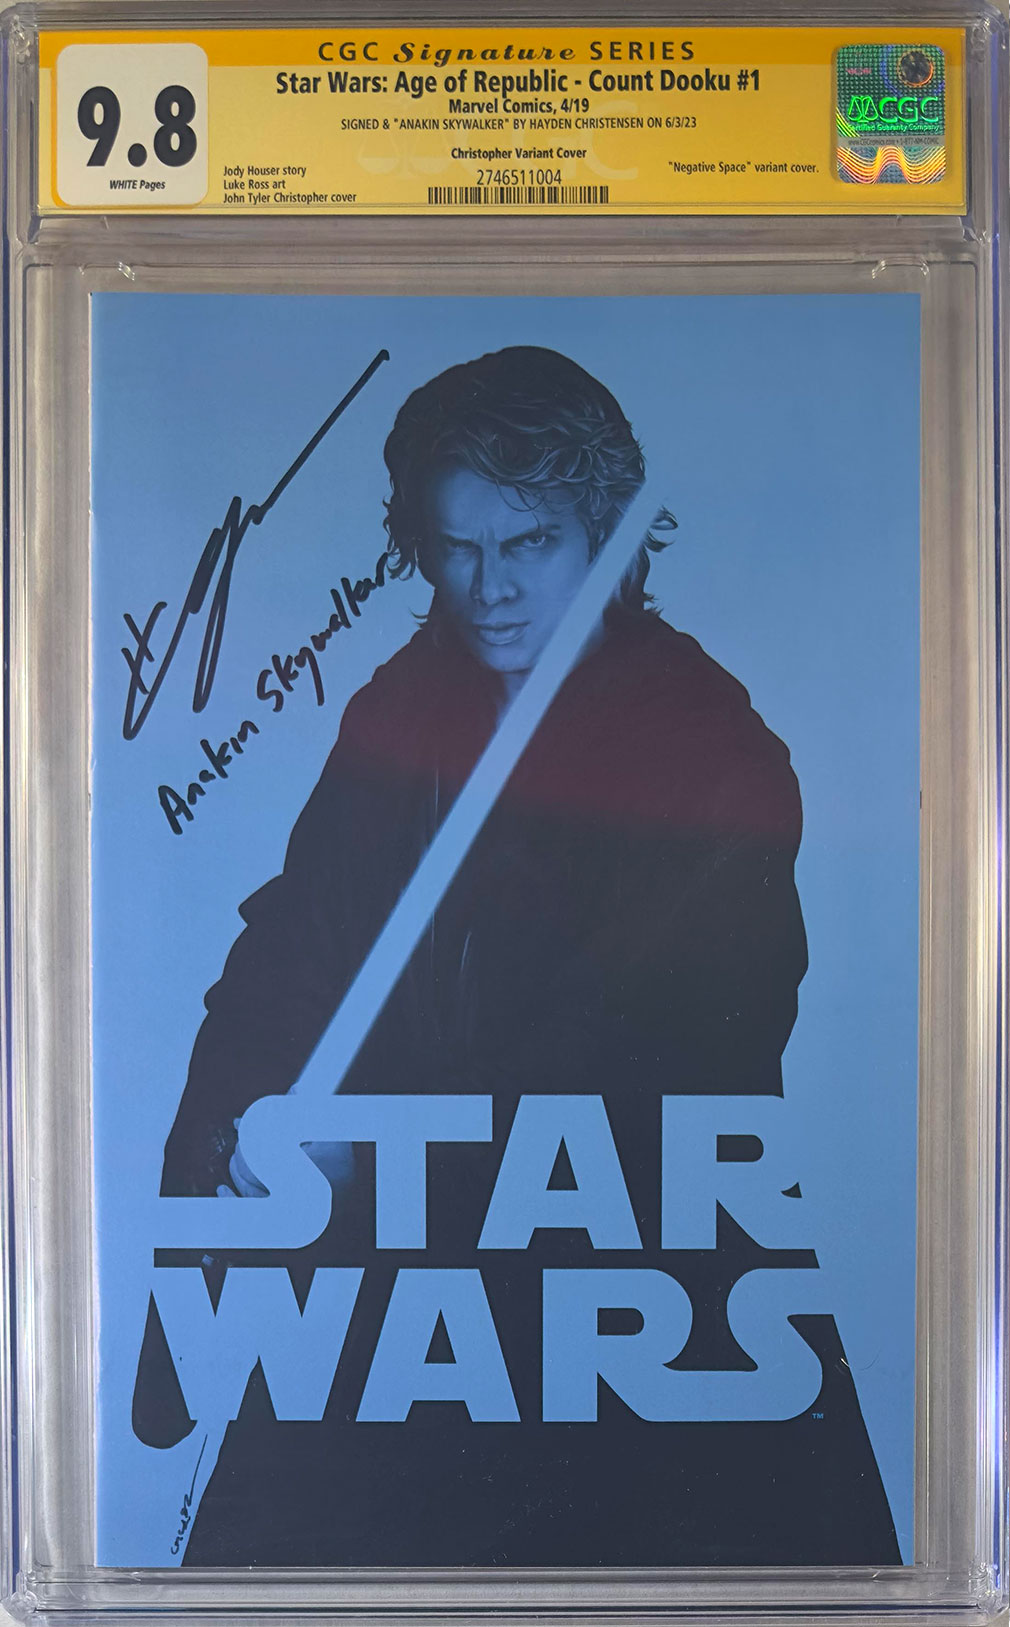 Star Wars: Age of Republic - Count Dooki #1 Variant CGC SS 9.8 Signed by Hayden Christensen